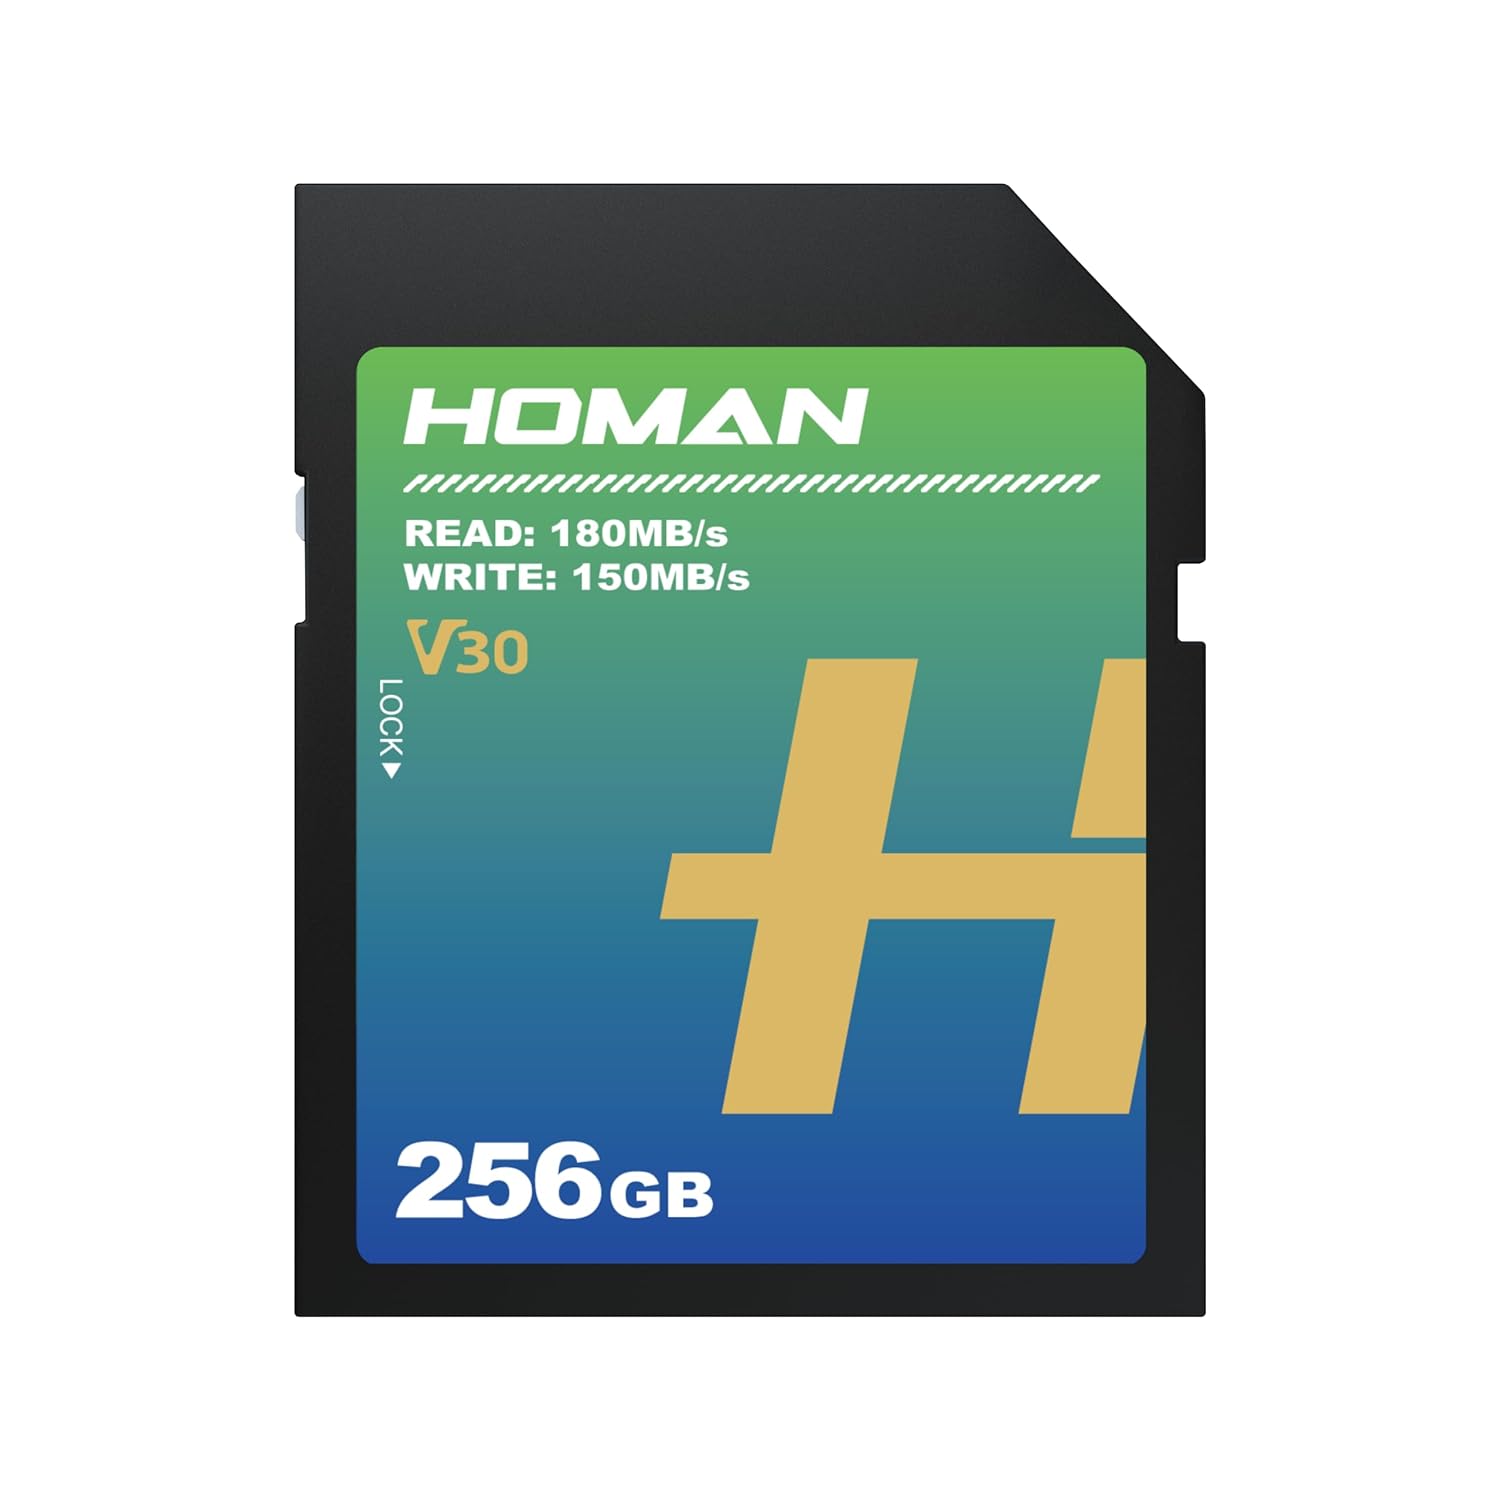 HOMAN UHS-I SD Card (V30) 256GB fit for Any Environmental Temperature from -10 Degree to 70 Degree Celsius with 5 Year Warranty & Recovery